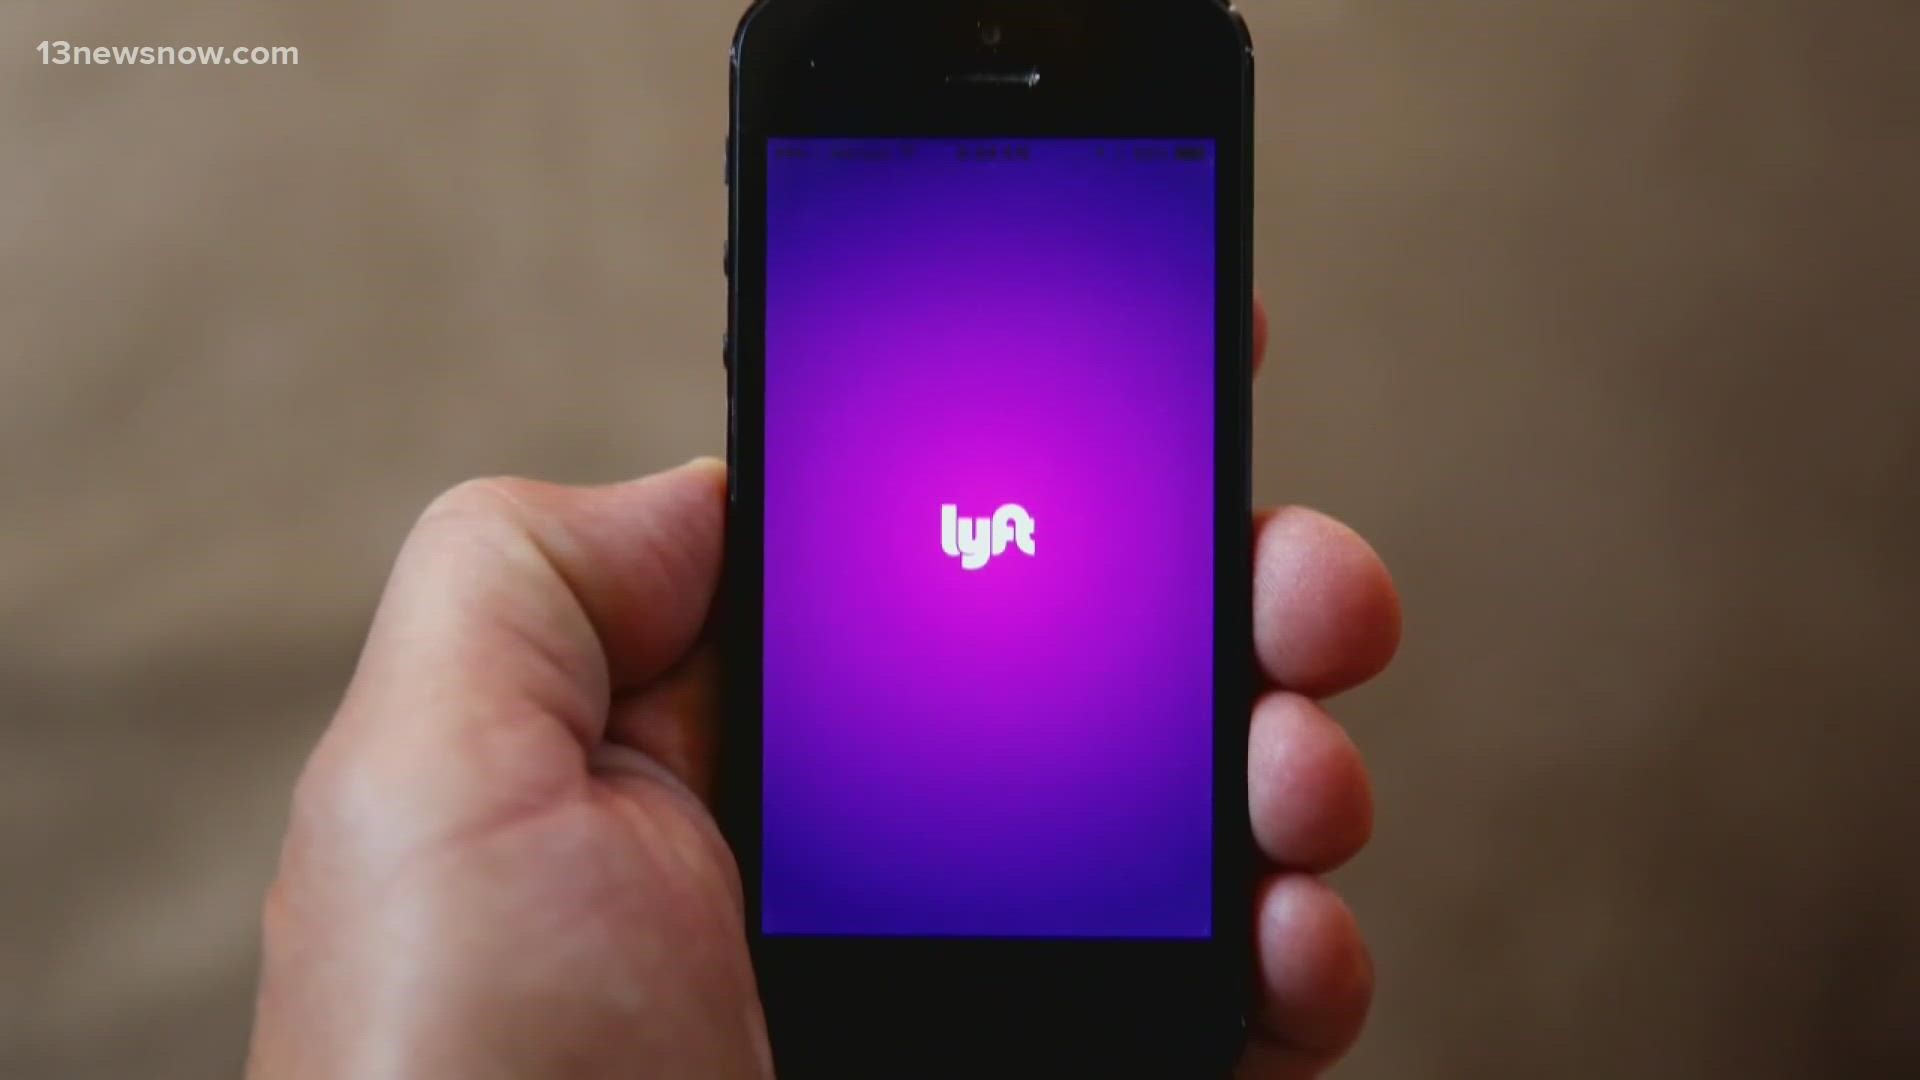 If you’re planning to celebrate the big game with a few alcoholic drinks, Drive Safe Hampton Roads is willing to give you a “Lyft" home for free.